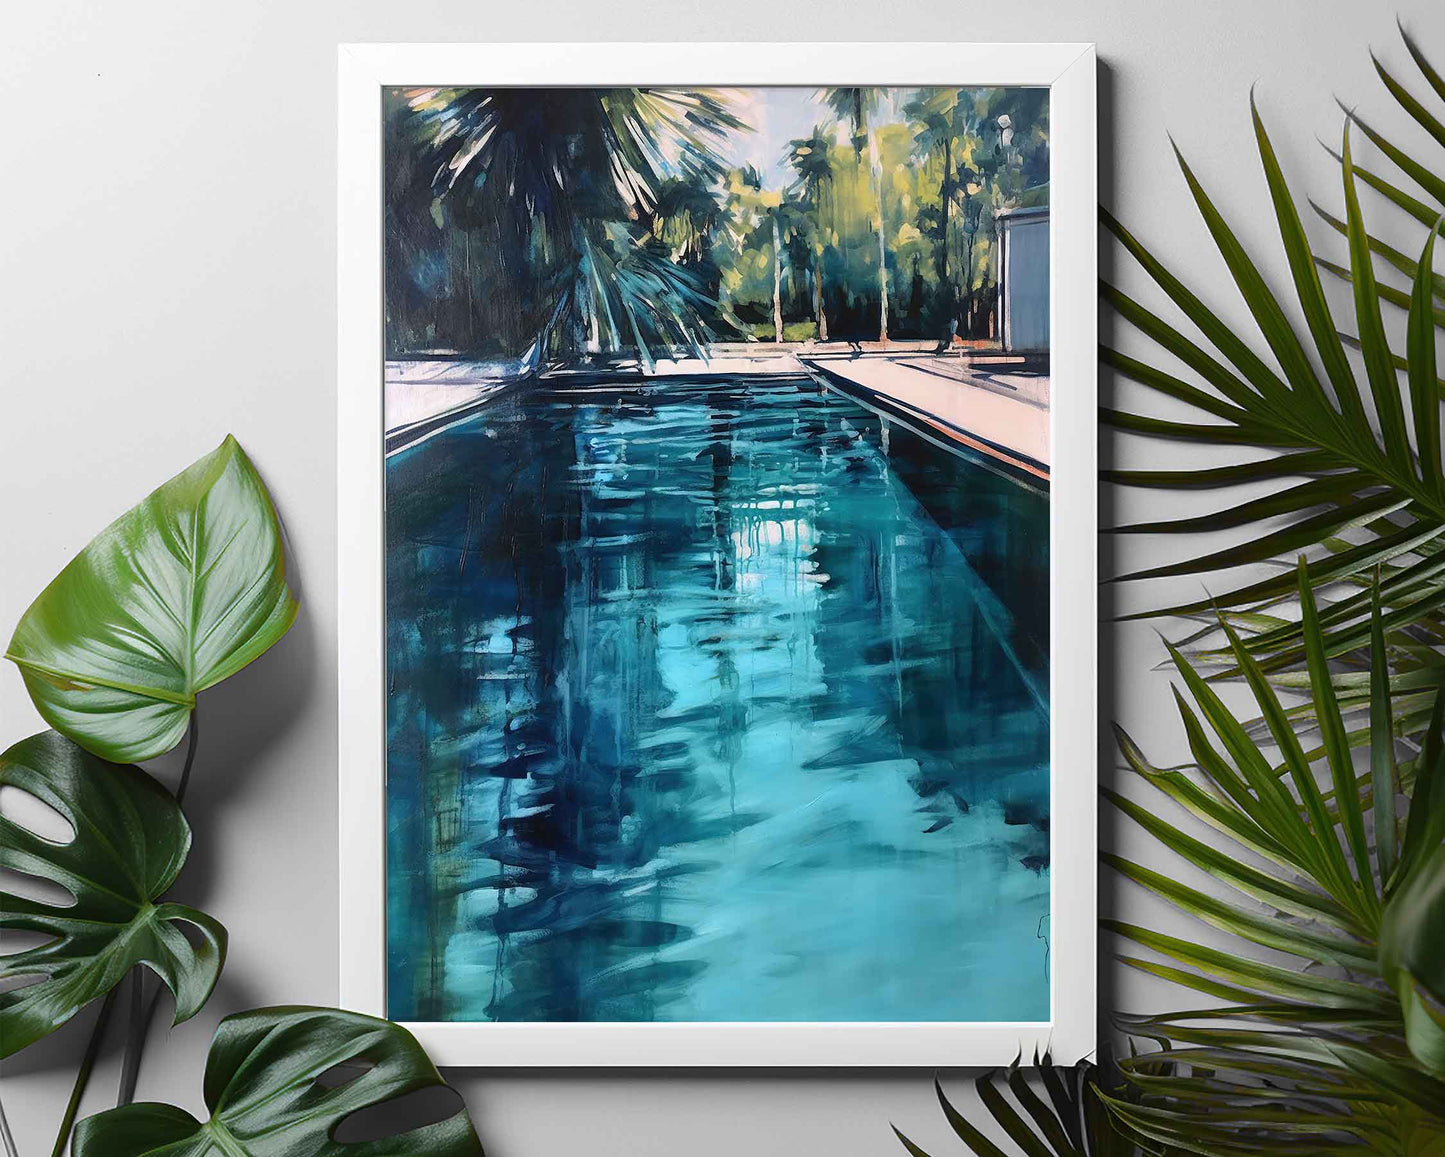 Framed Image of Abstract Water Reflections and Swimming Pool Wall Art Prints